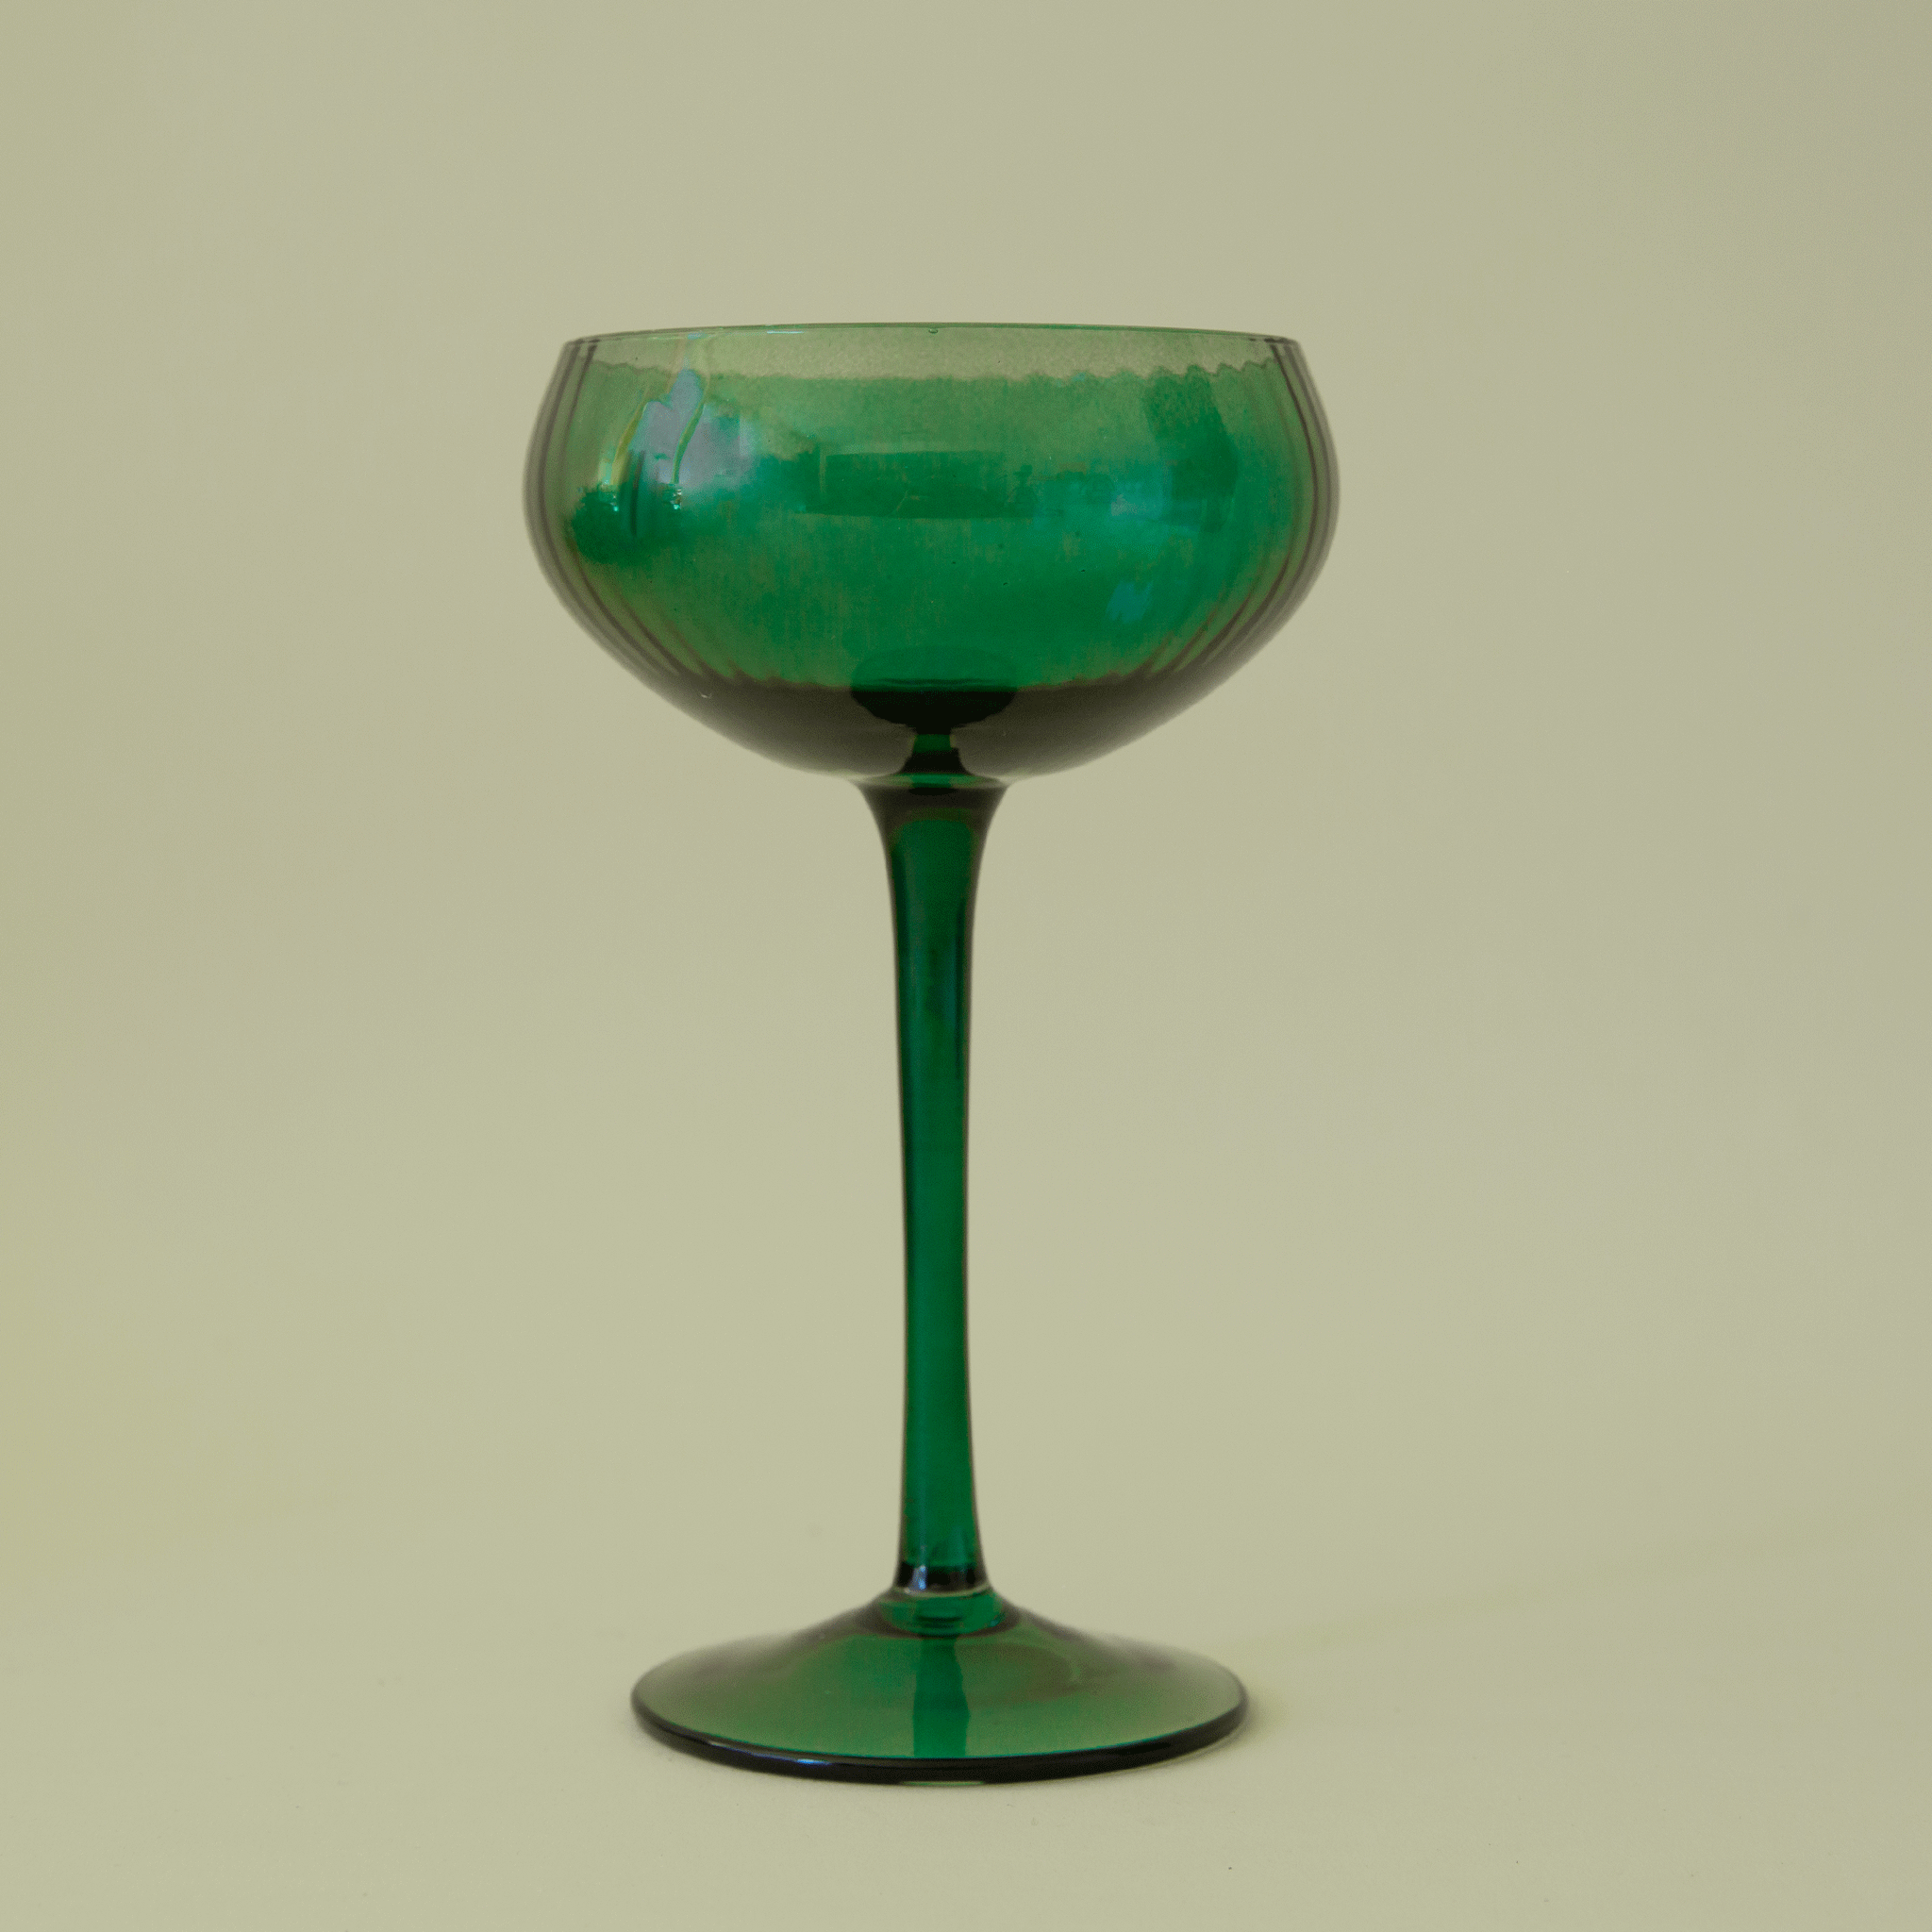 On a green background is a green glass coup glass with a subtle ribbed texture. 